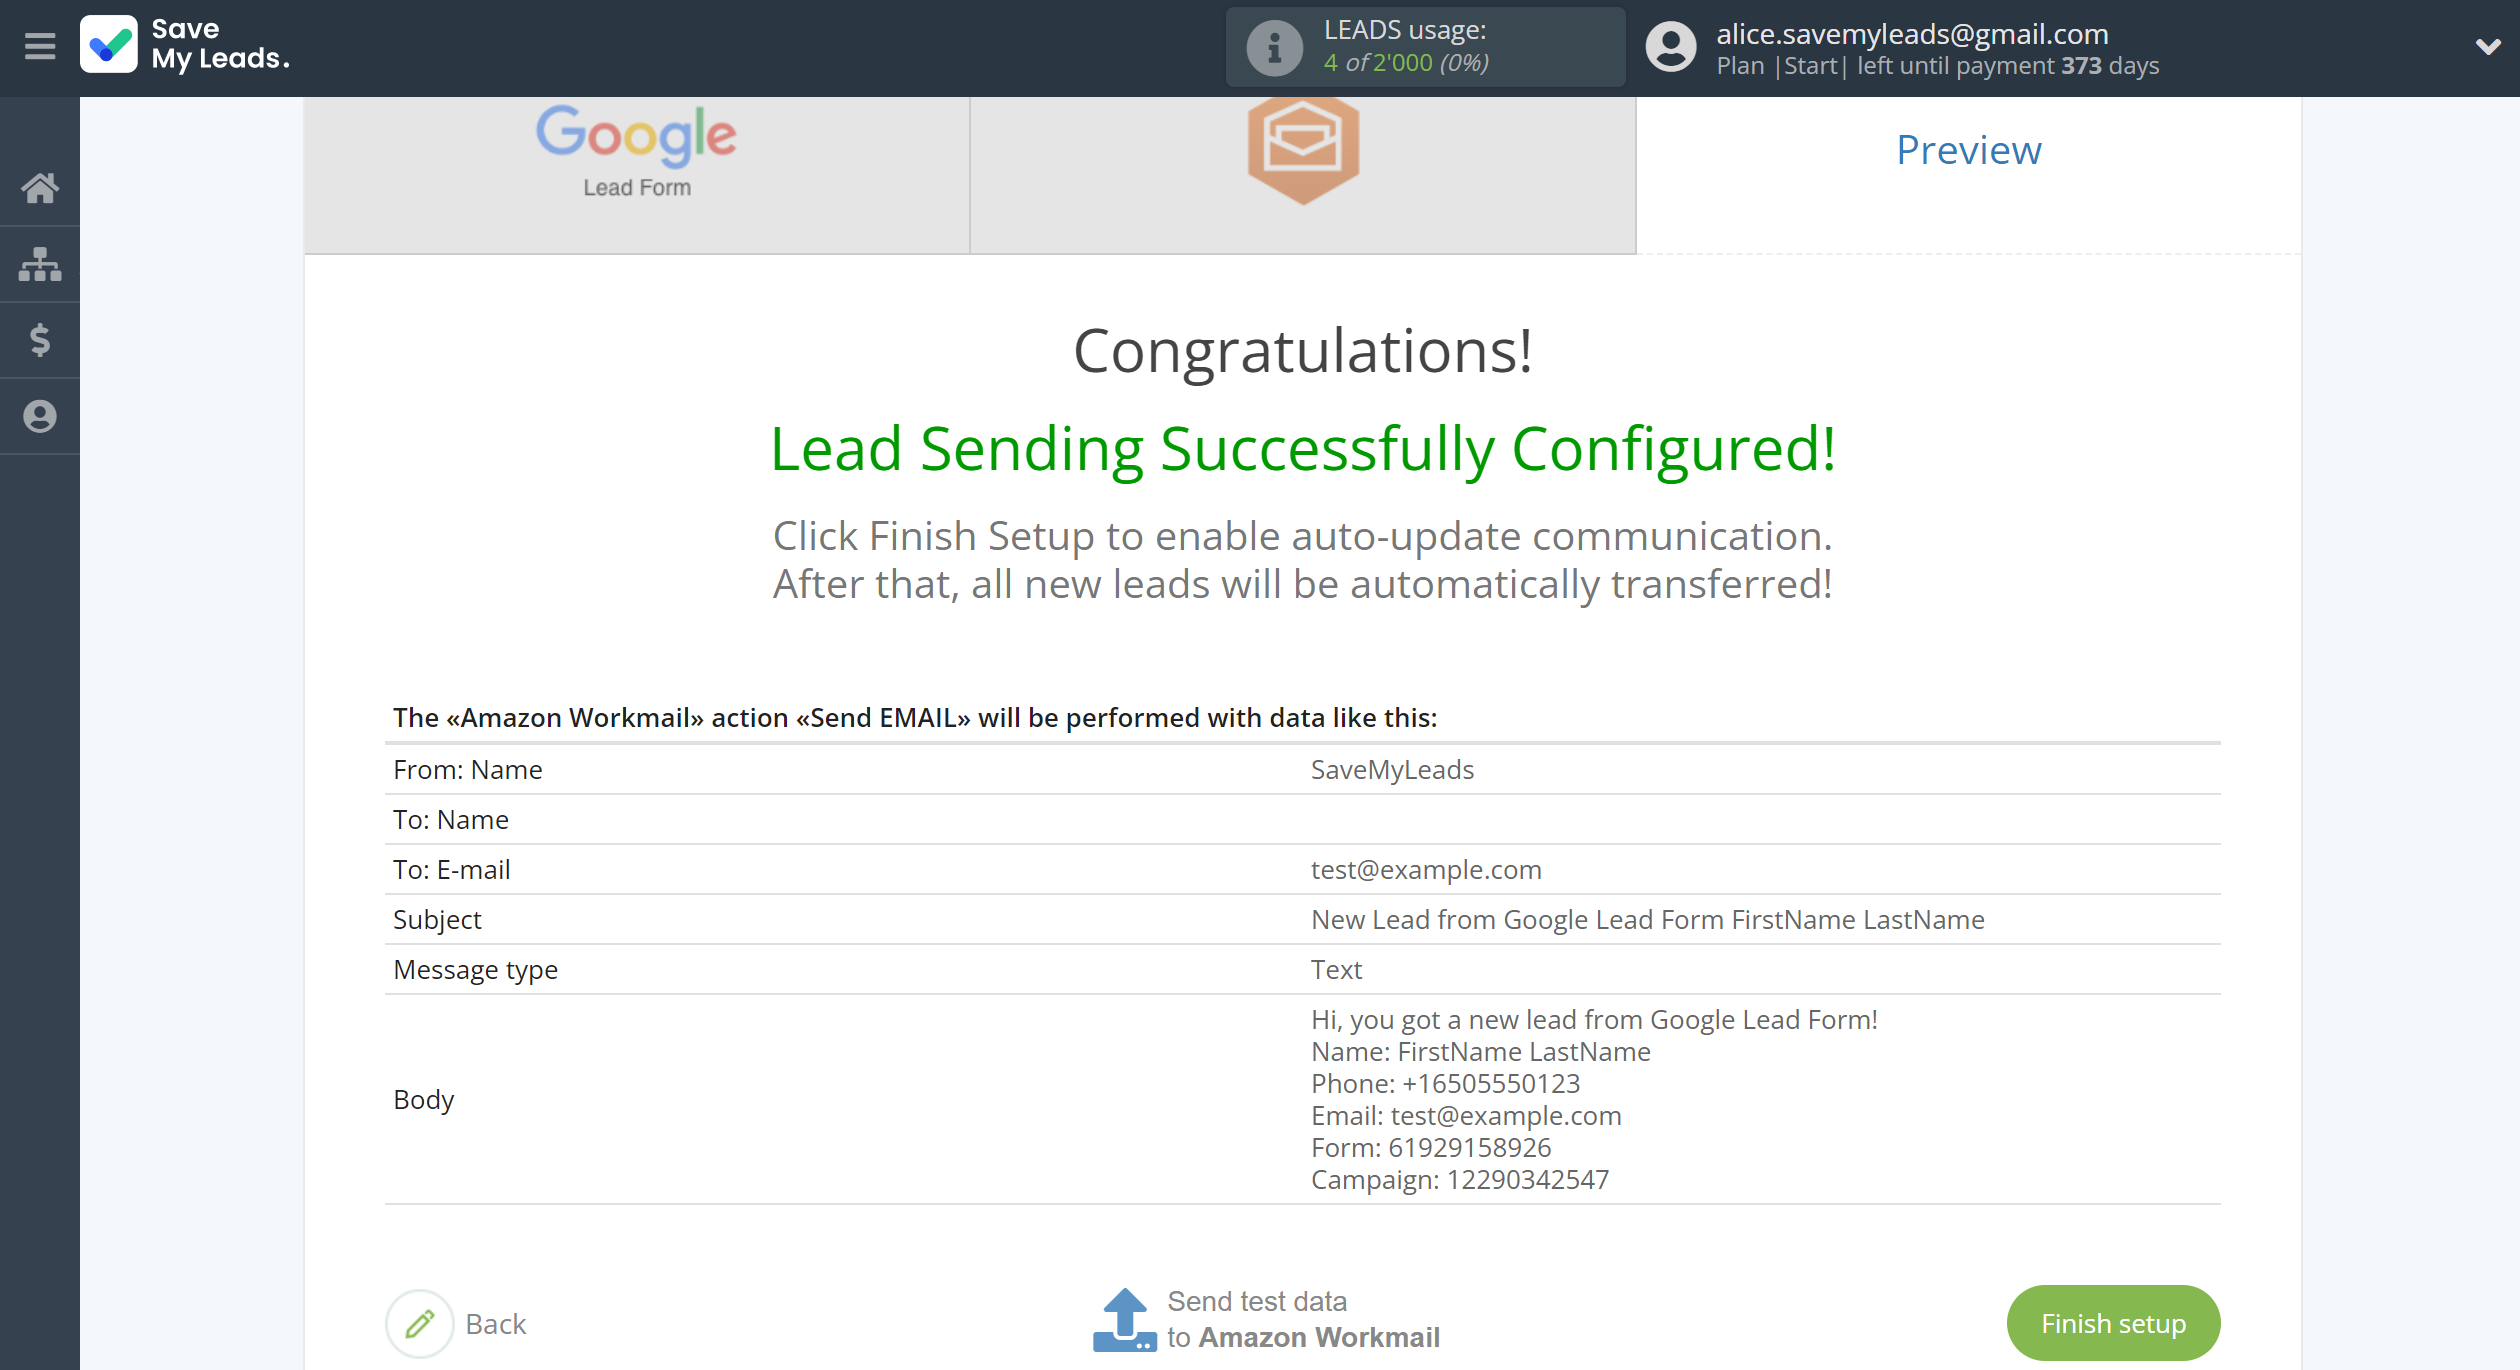 How to Connect Google Lead Form with Amazon Workmail | Test data